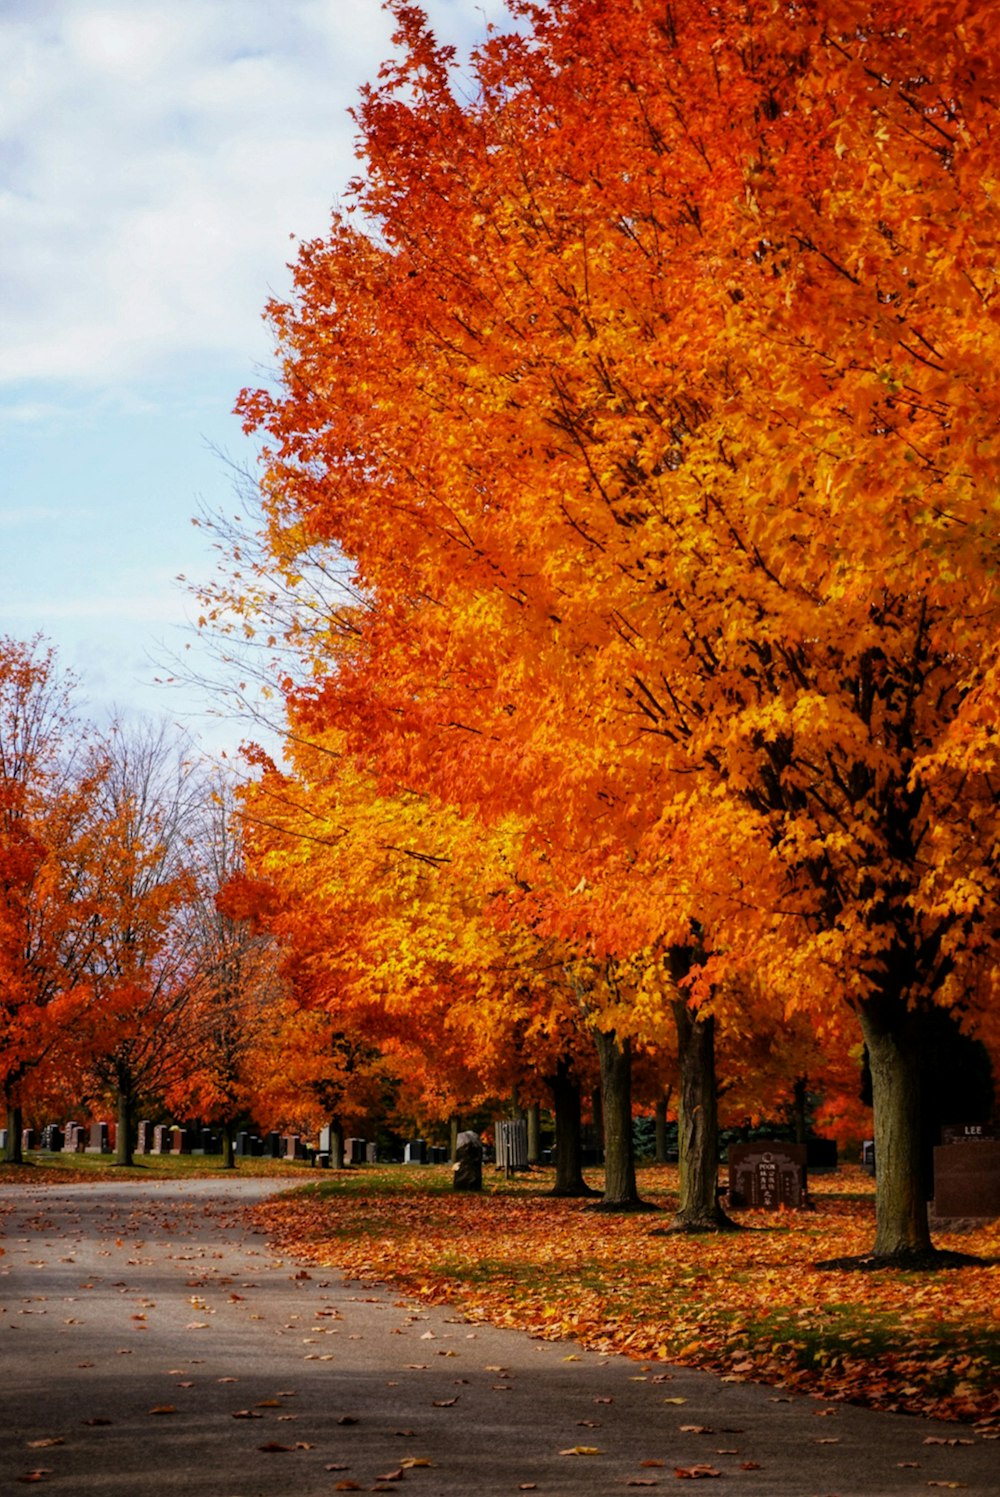 a tree lined street with lots of orange and yellow leaves